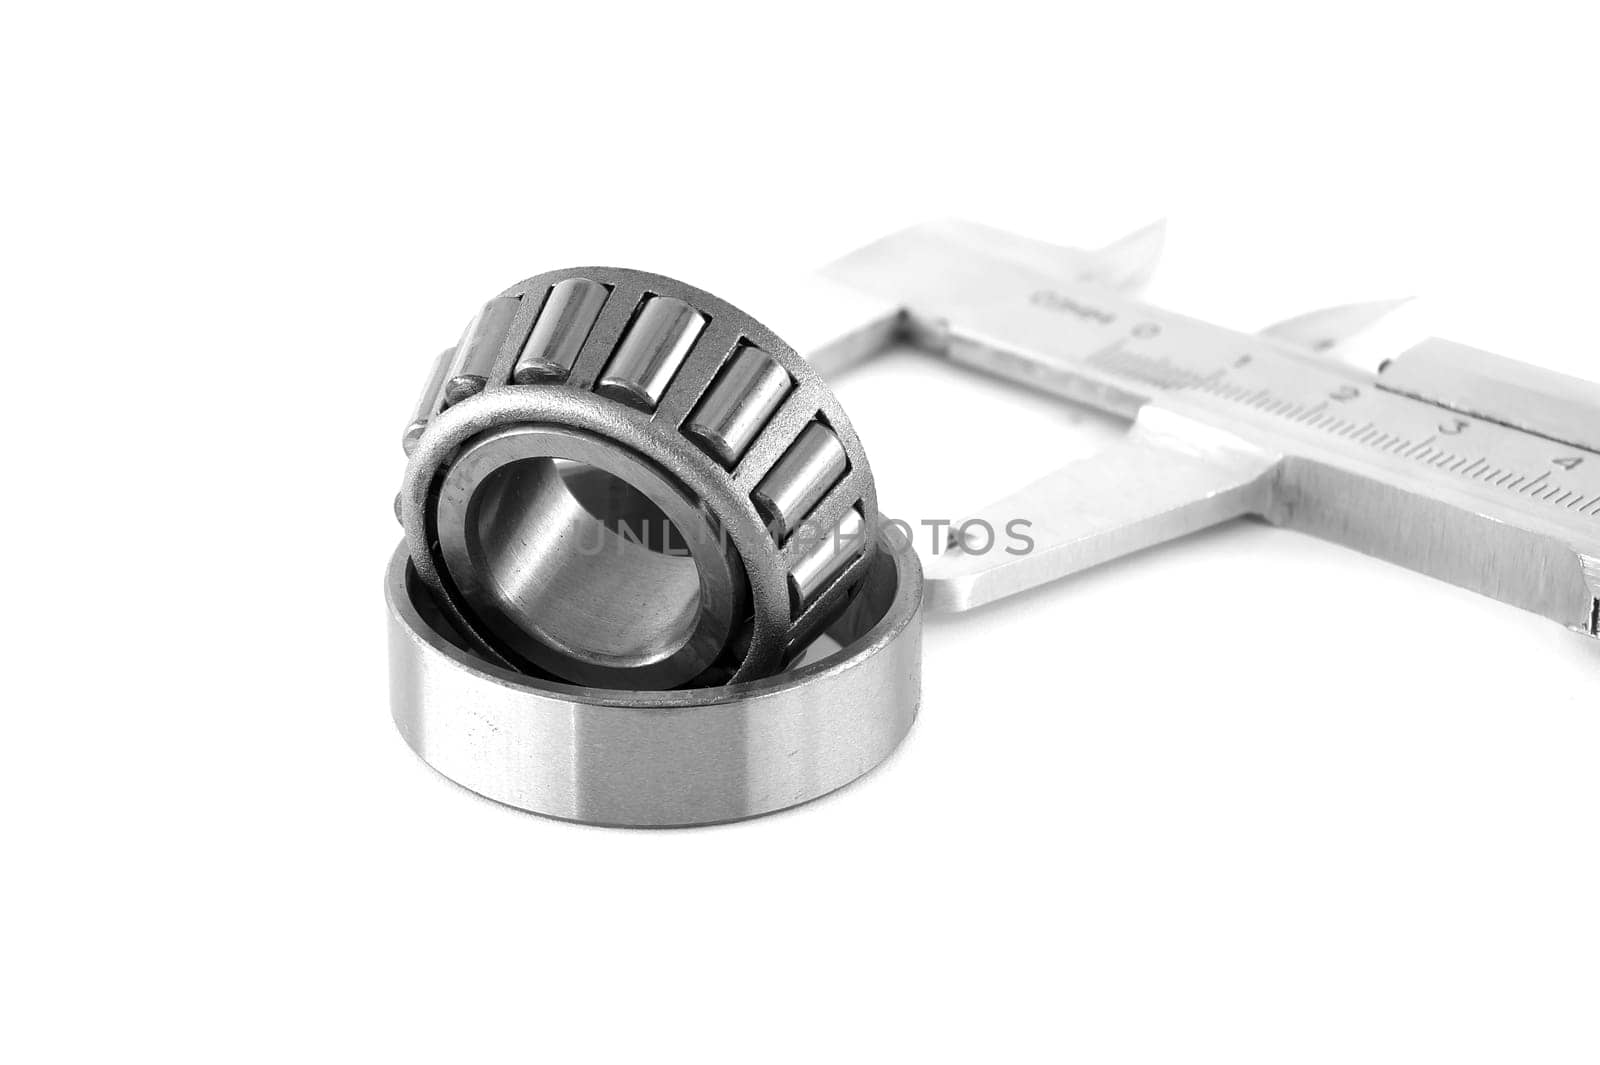 Stainless steel cylindrical roller bearing with an inner ring isolated on white background